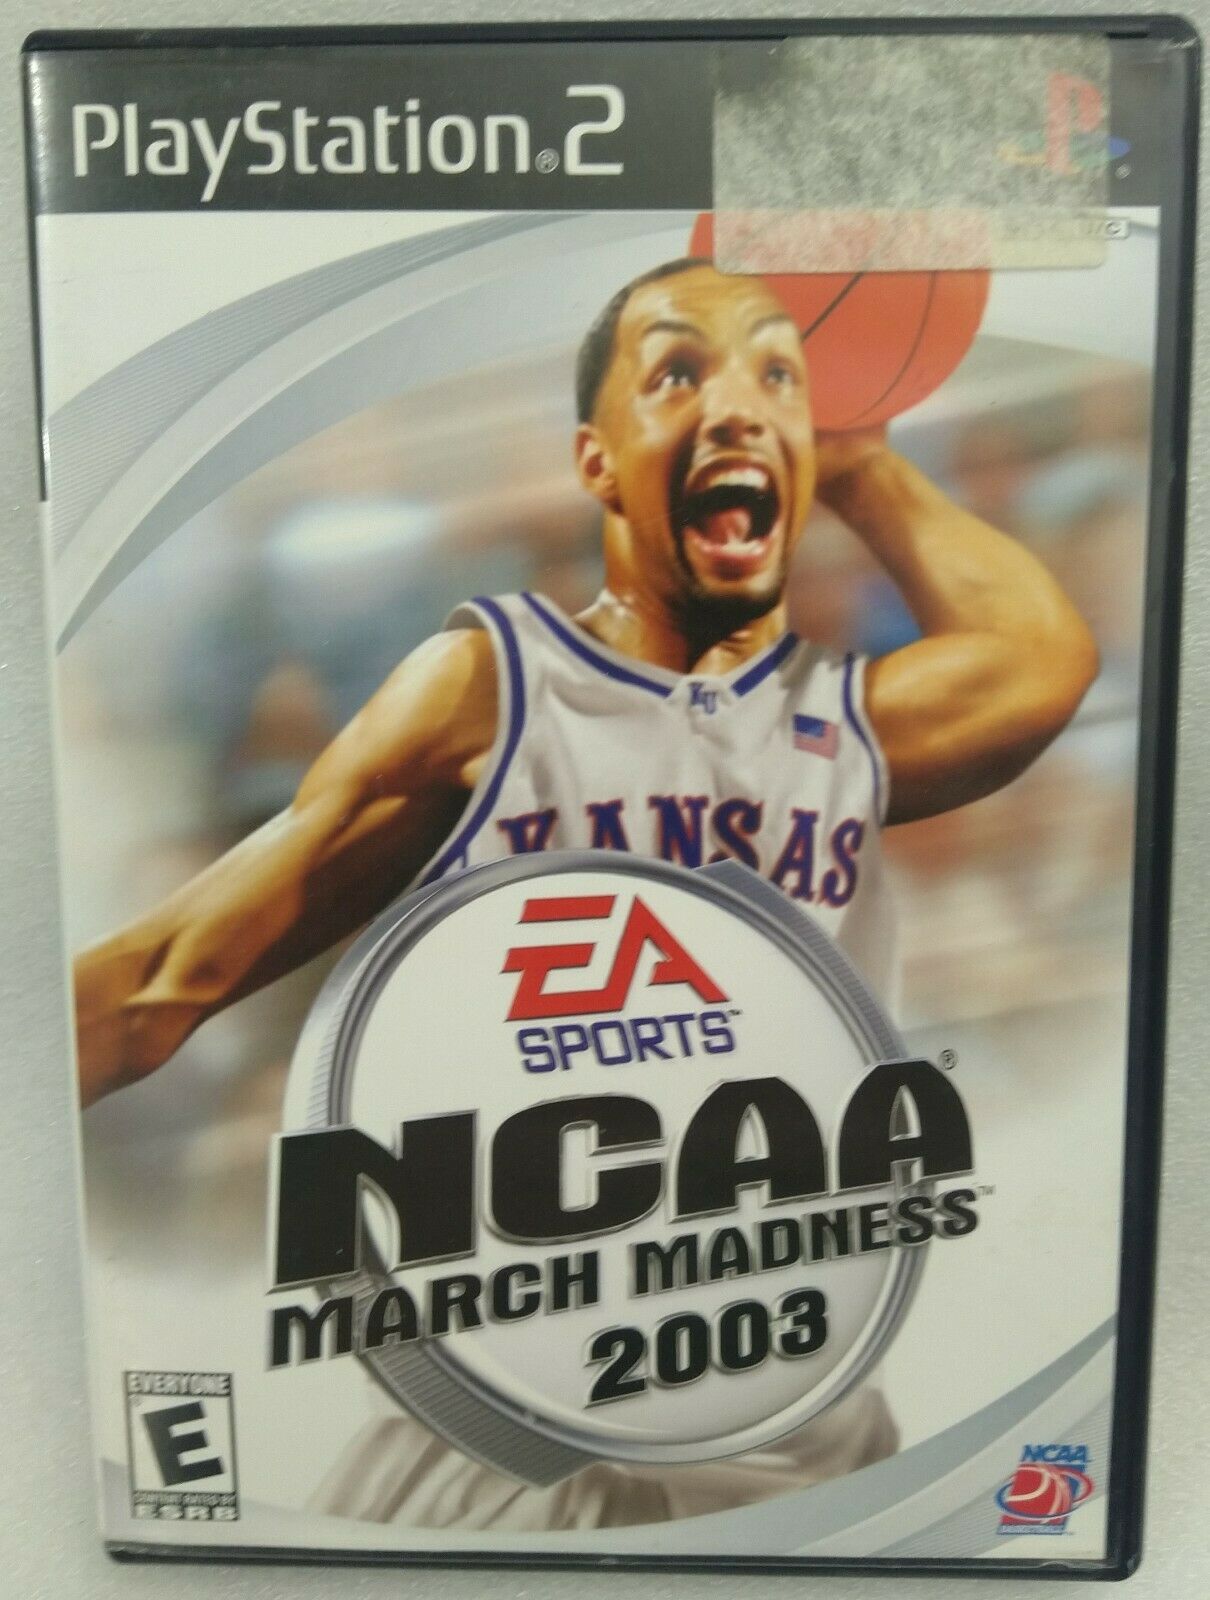 Primary image for VG NCAA March Madness 2003 (Sony PlayStation 2, 2002)